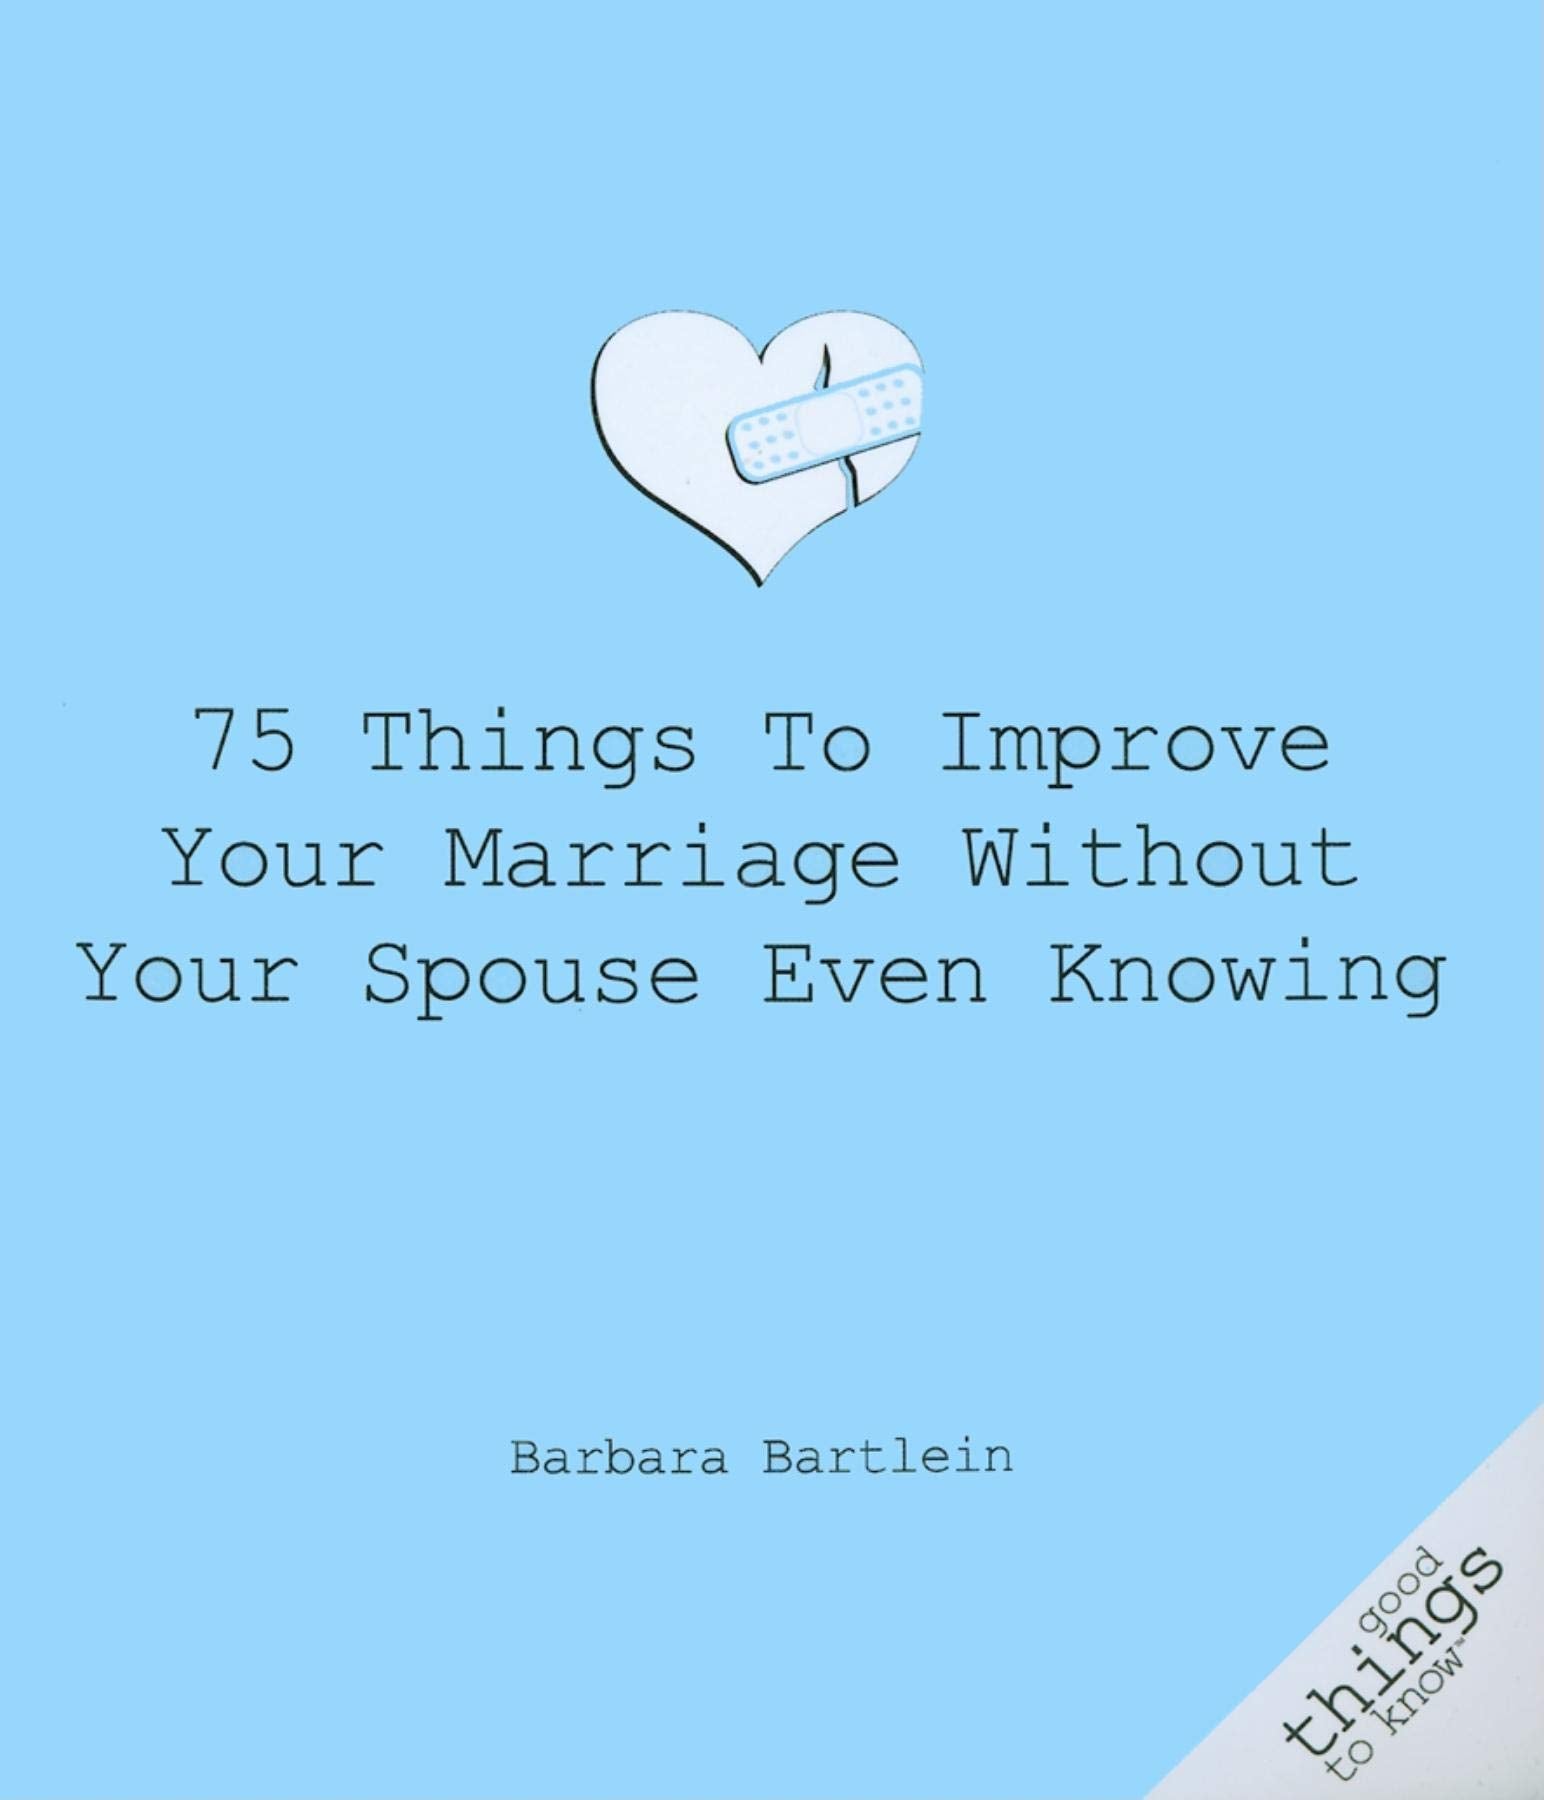 75 Things to Improve Your Marriage Without Your Spouse Even Knowing ( Good Things to Know ) - SureShot Books Publishing LLC